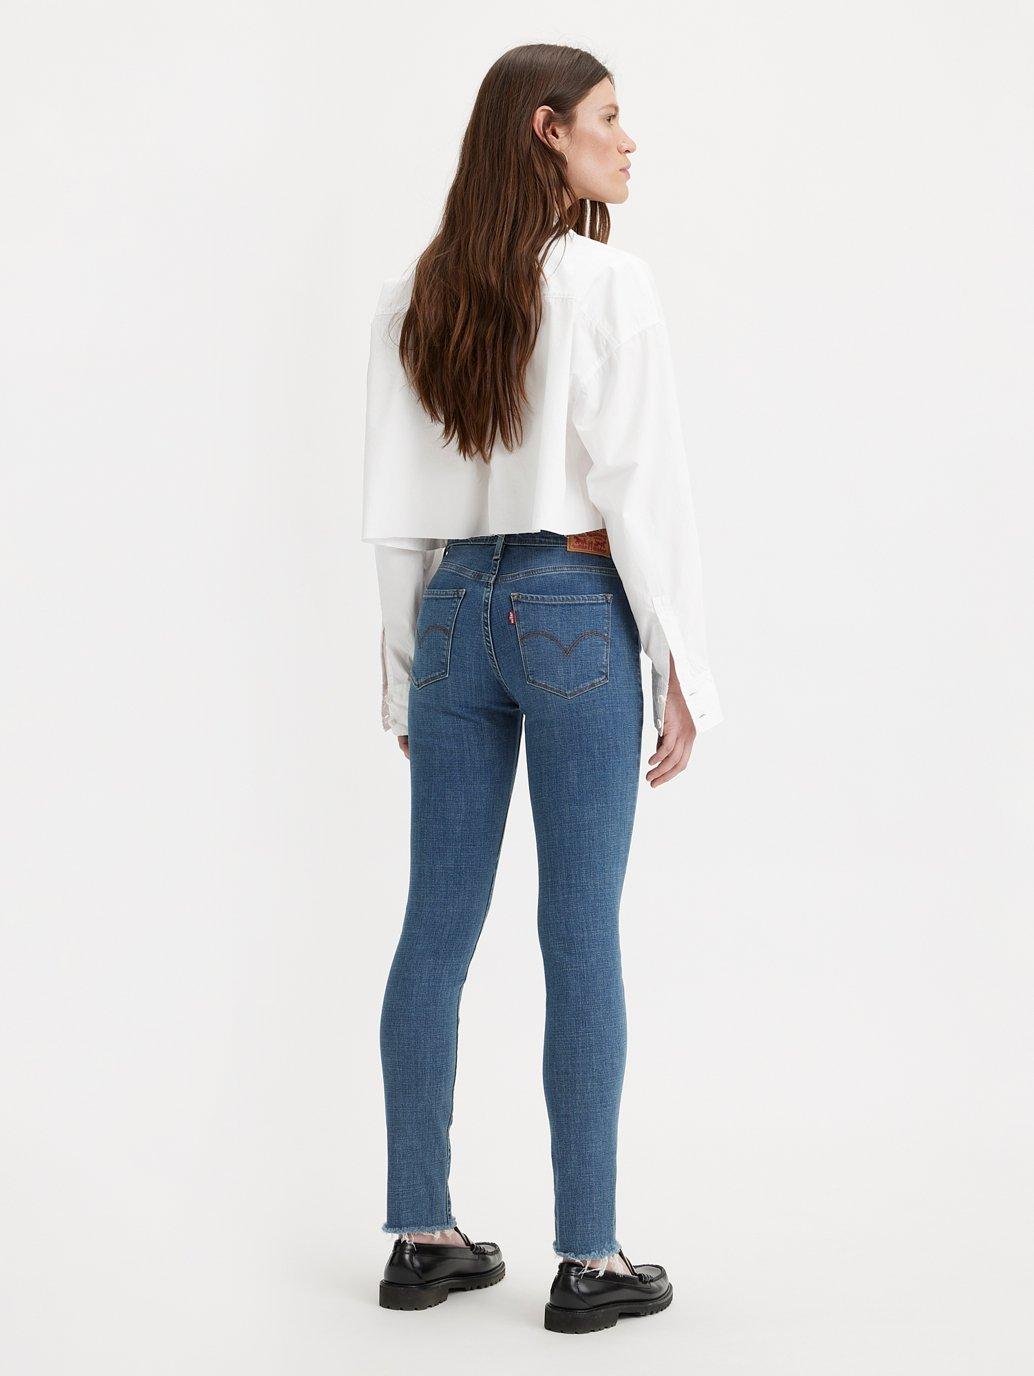 Buy Levi's® Women's 311 Shaping Skinny Jeans | Levi’s® Official Online ...